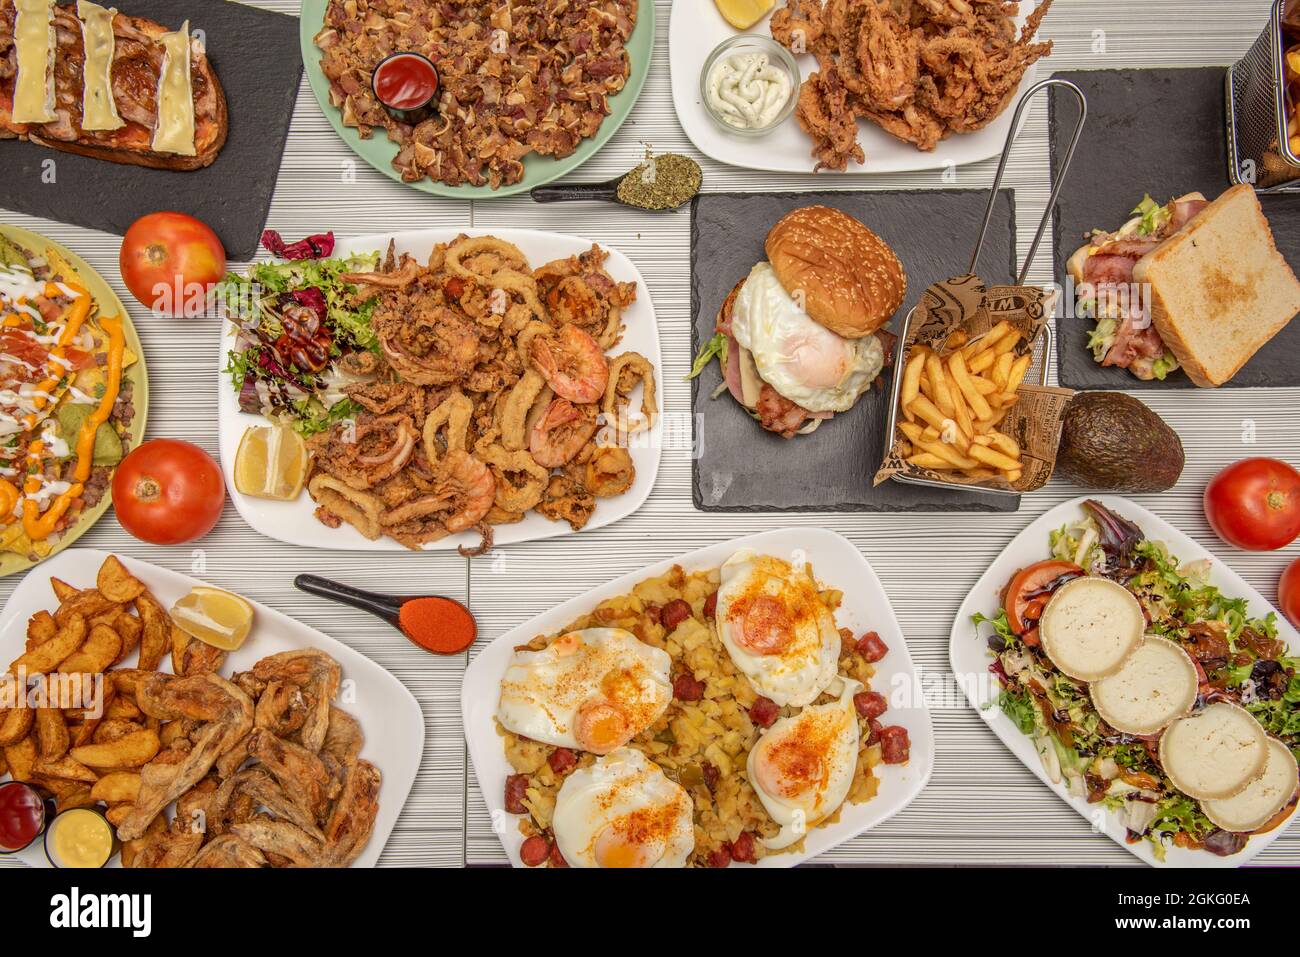 Top view image of popular Spanish dishes and tapas. Fried wings, squid squid, squid sandwich, chicken sandwich, salad with anchovies. Stock Photo